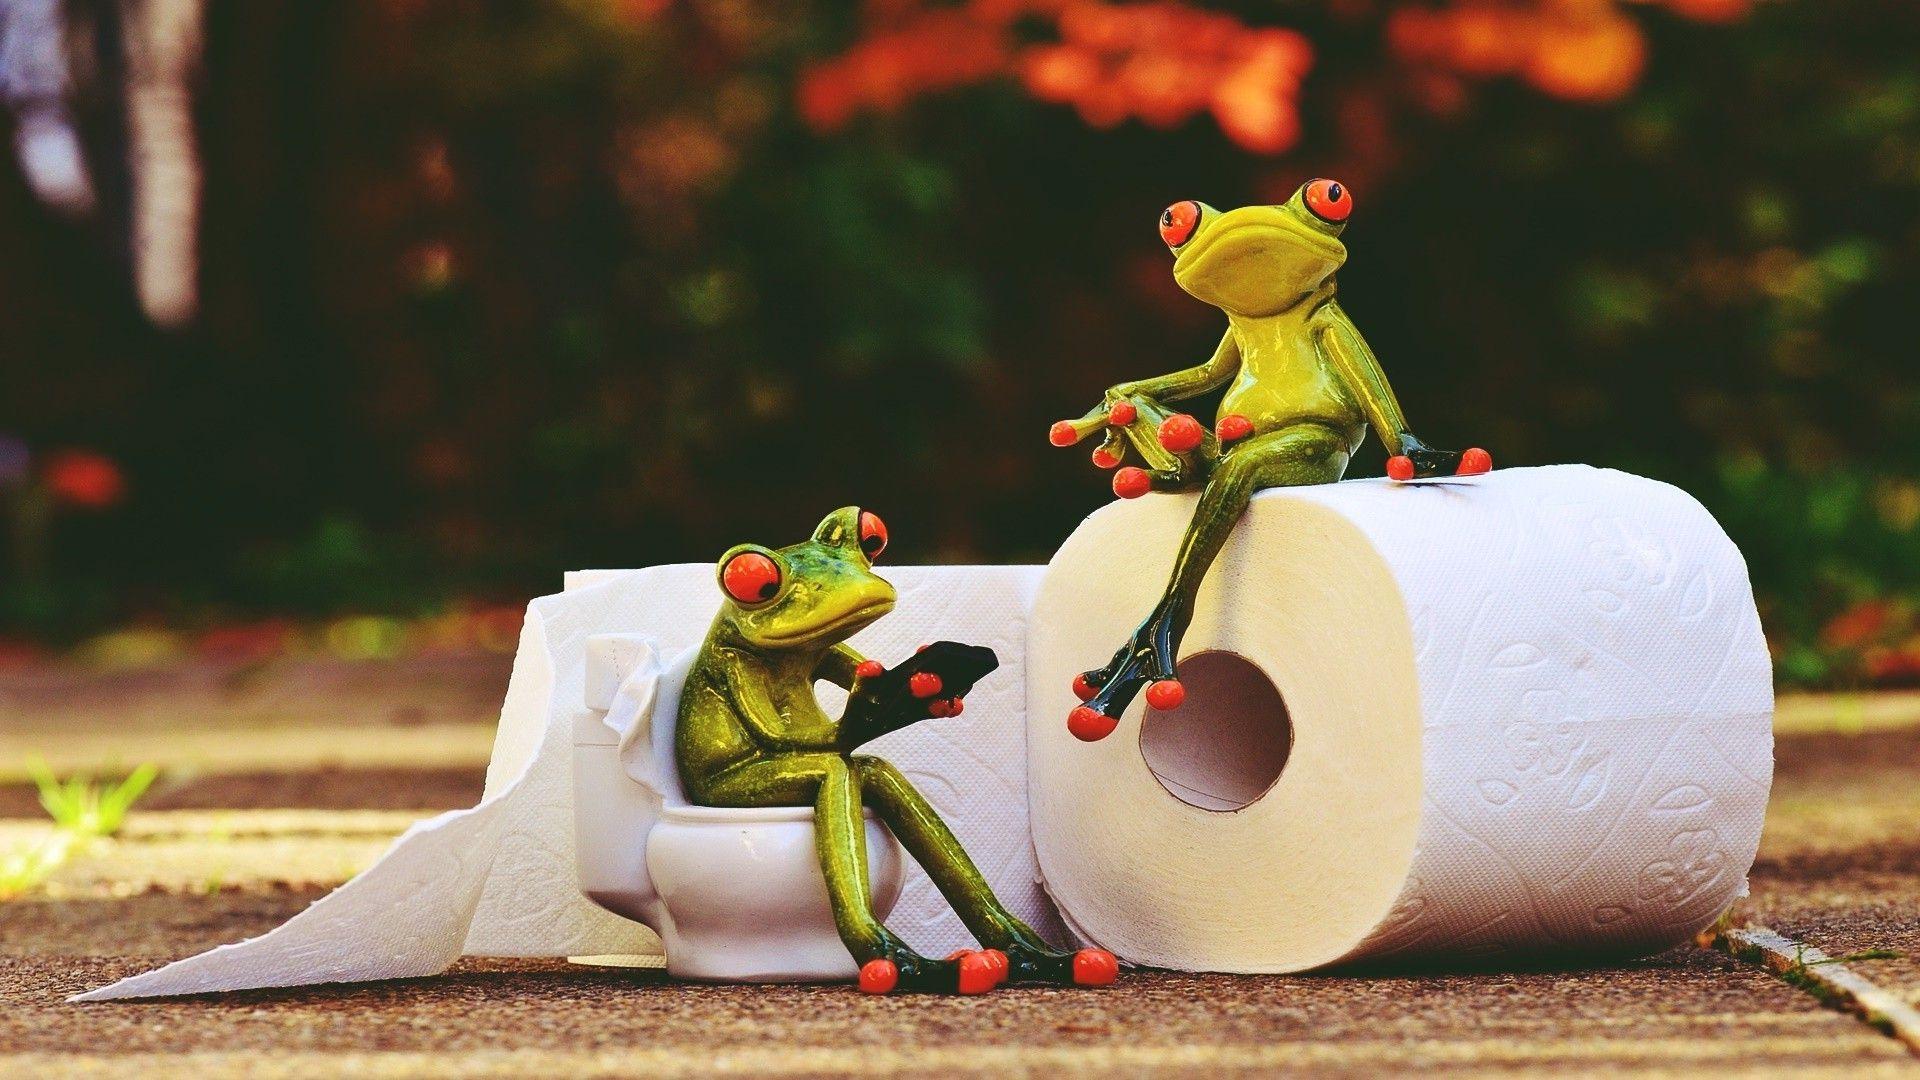 retro style frog toilet paper animals situation vintage wallpaper